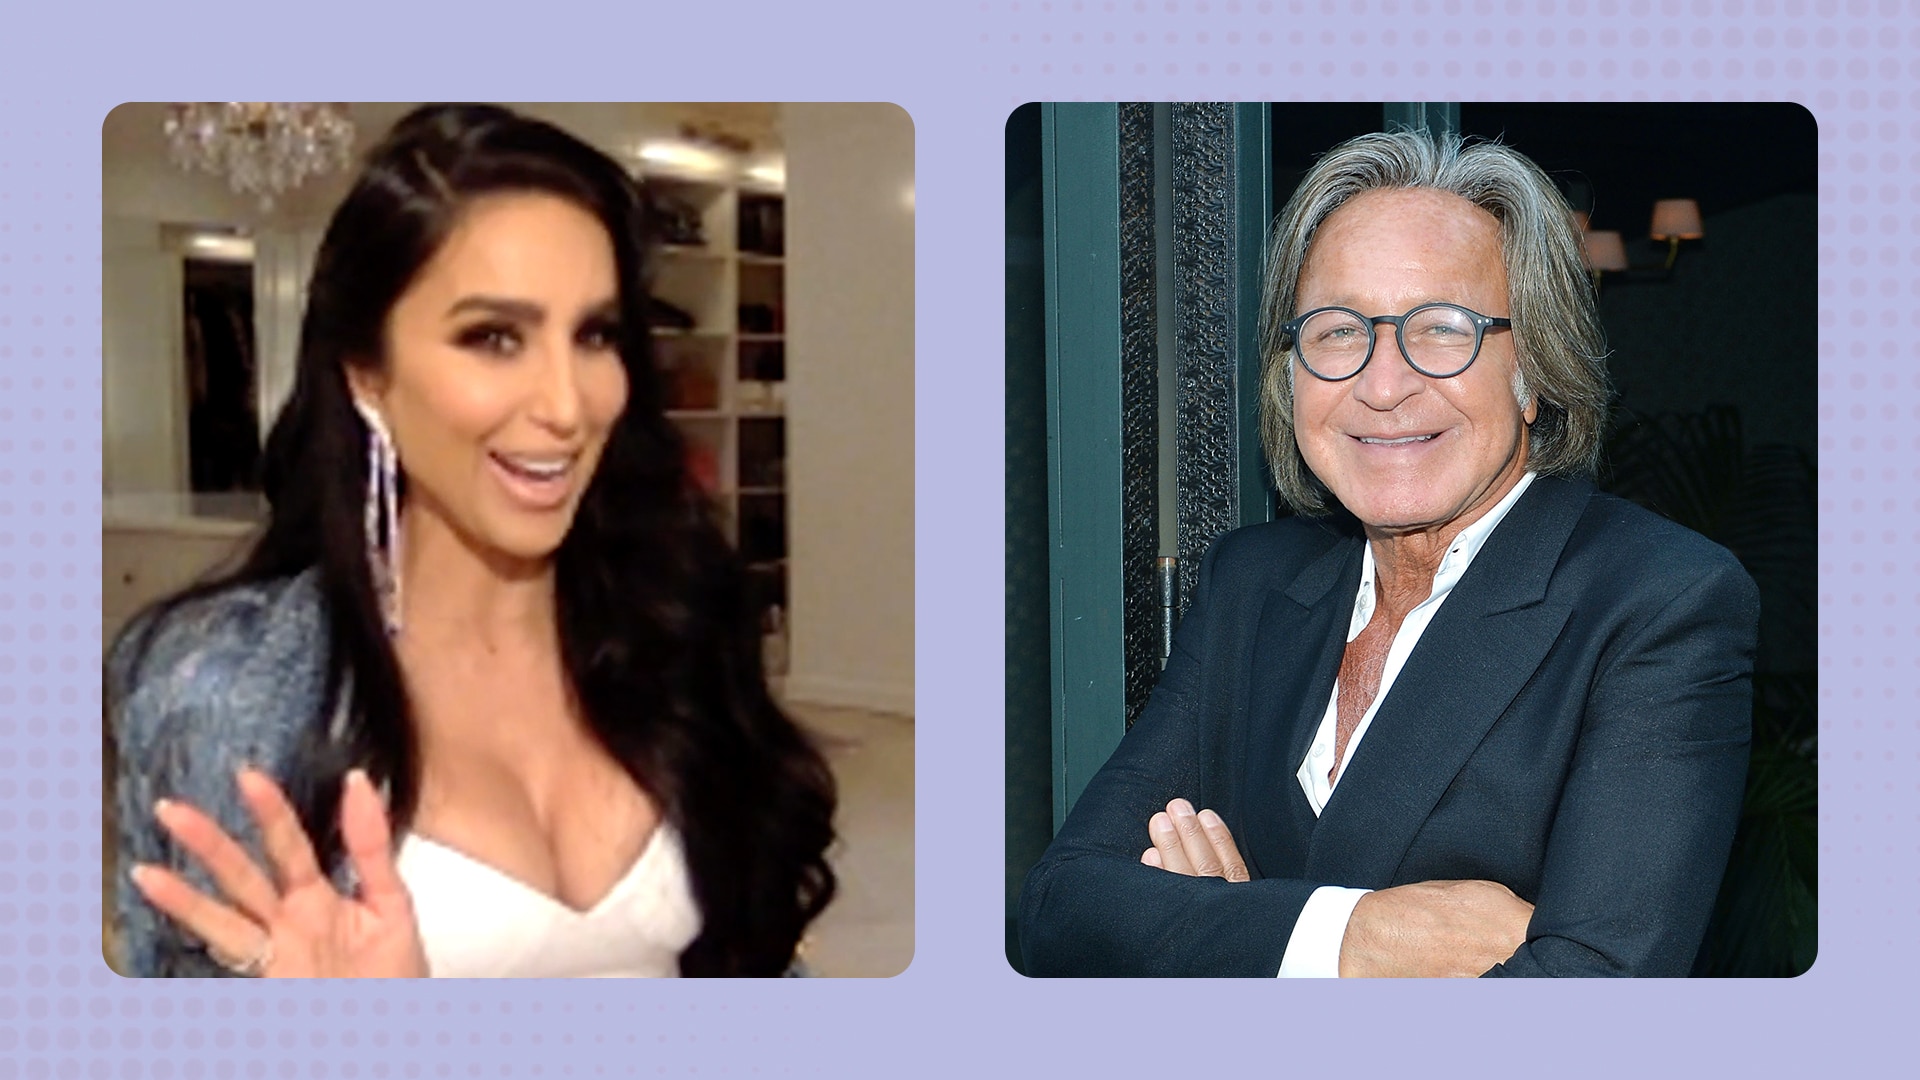 Lilly Ghalichi Says a Bad Date with a Foot Fetishist Is How She Met and Became Friends with Mohamed Hadid